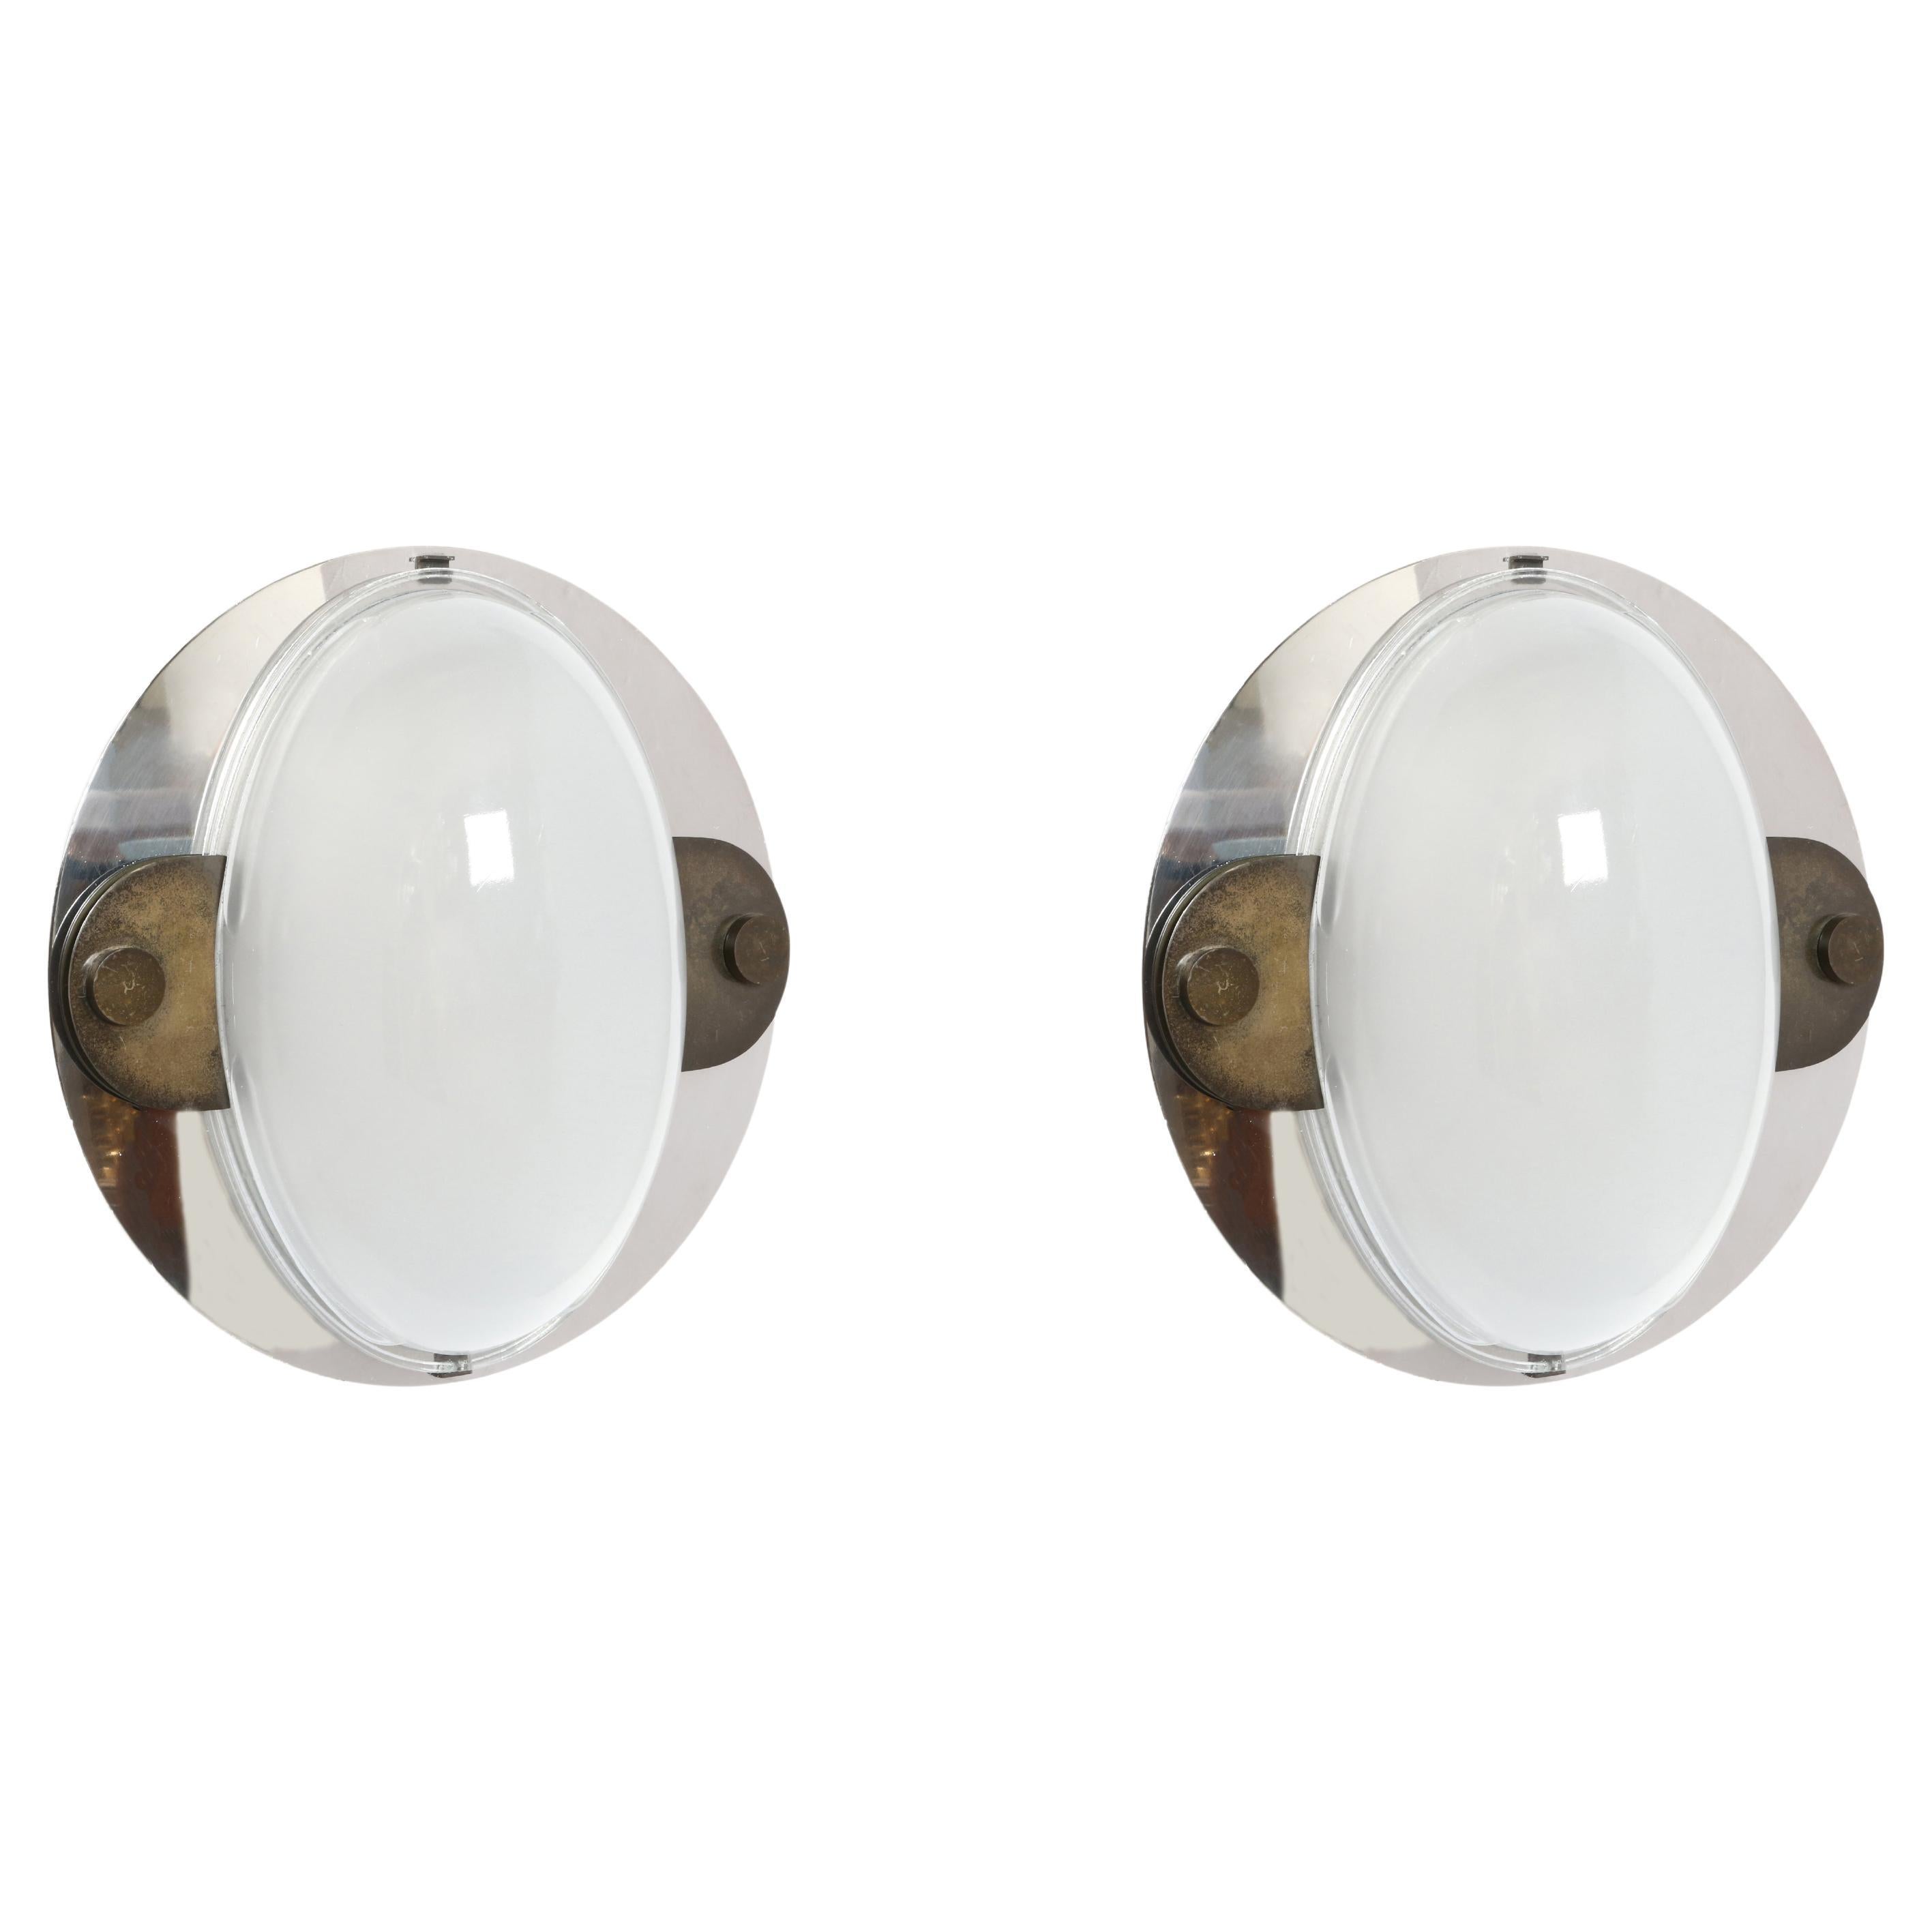 Luigi Caccia Dominioni for Azucena Large Wall Lights or Ceiling Lights, a Pair For Sale